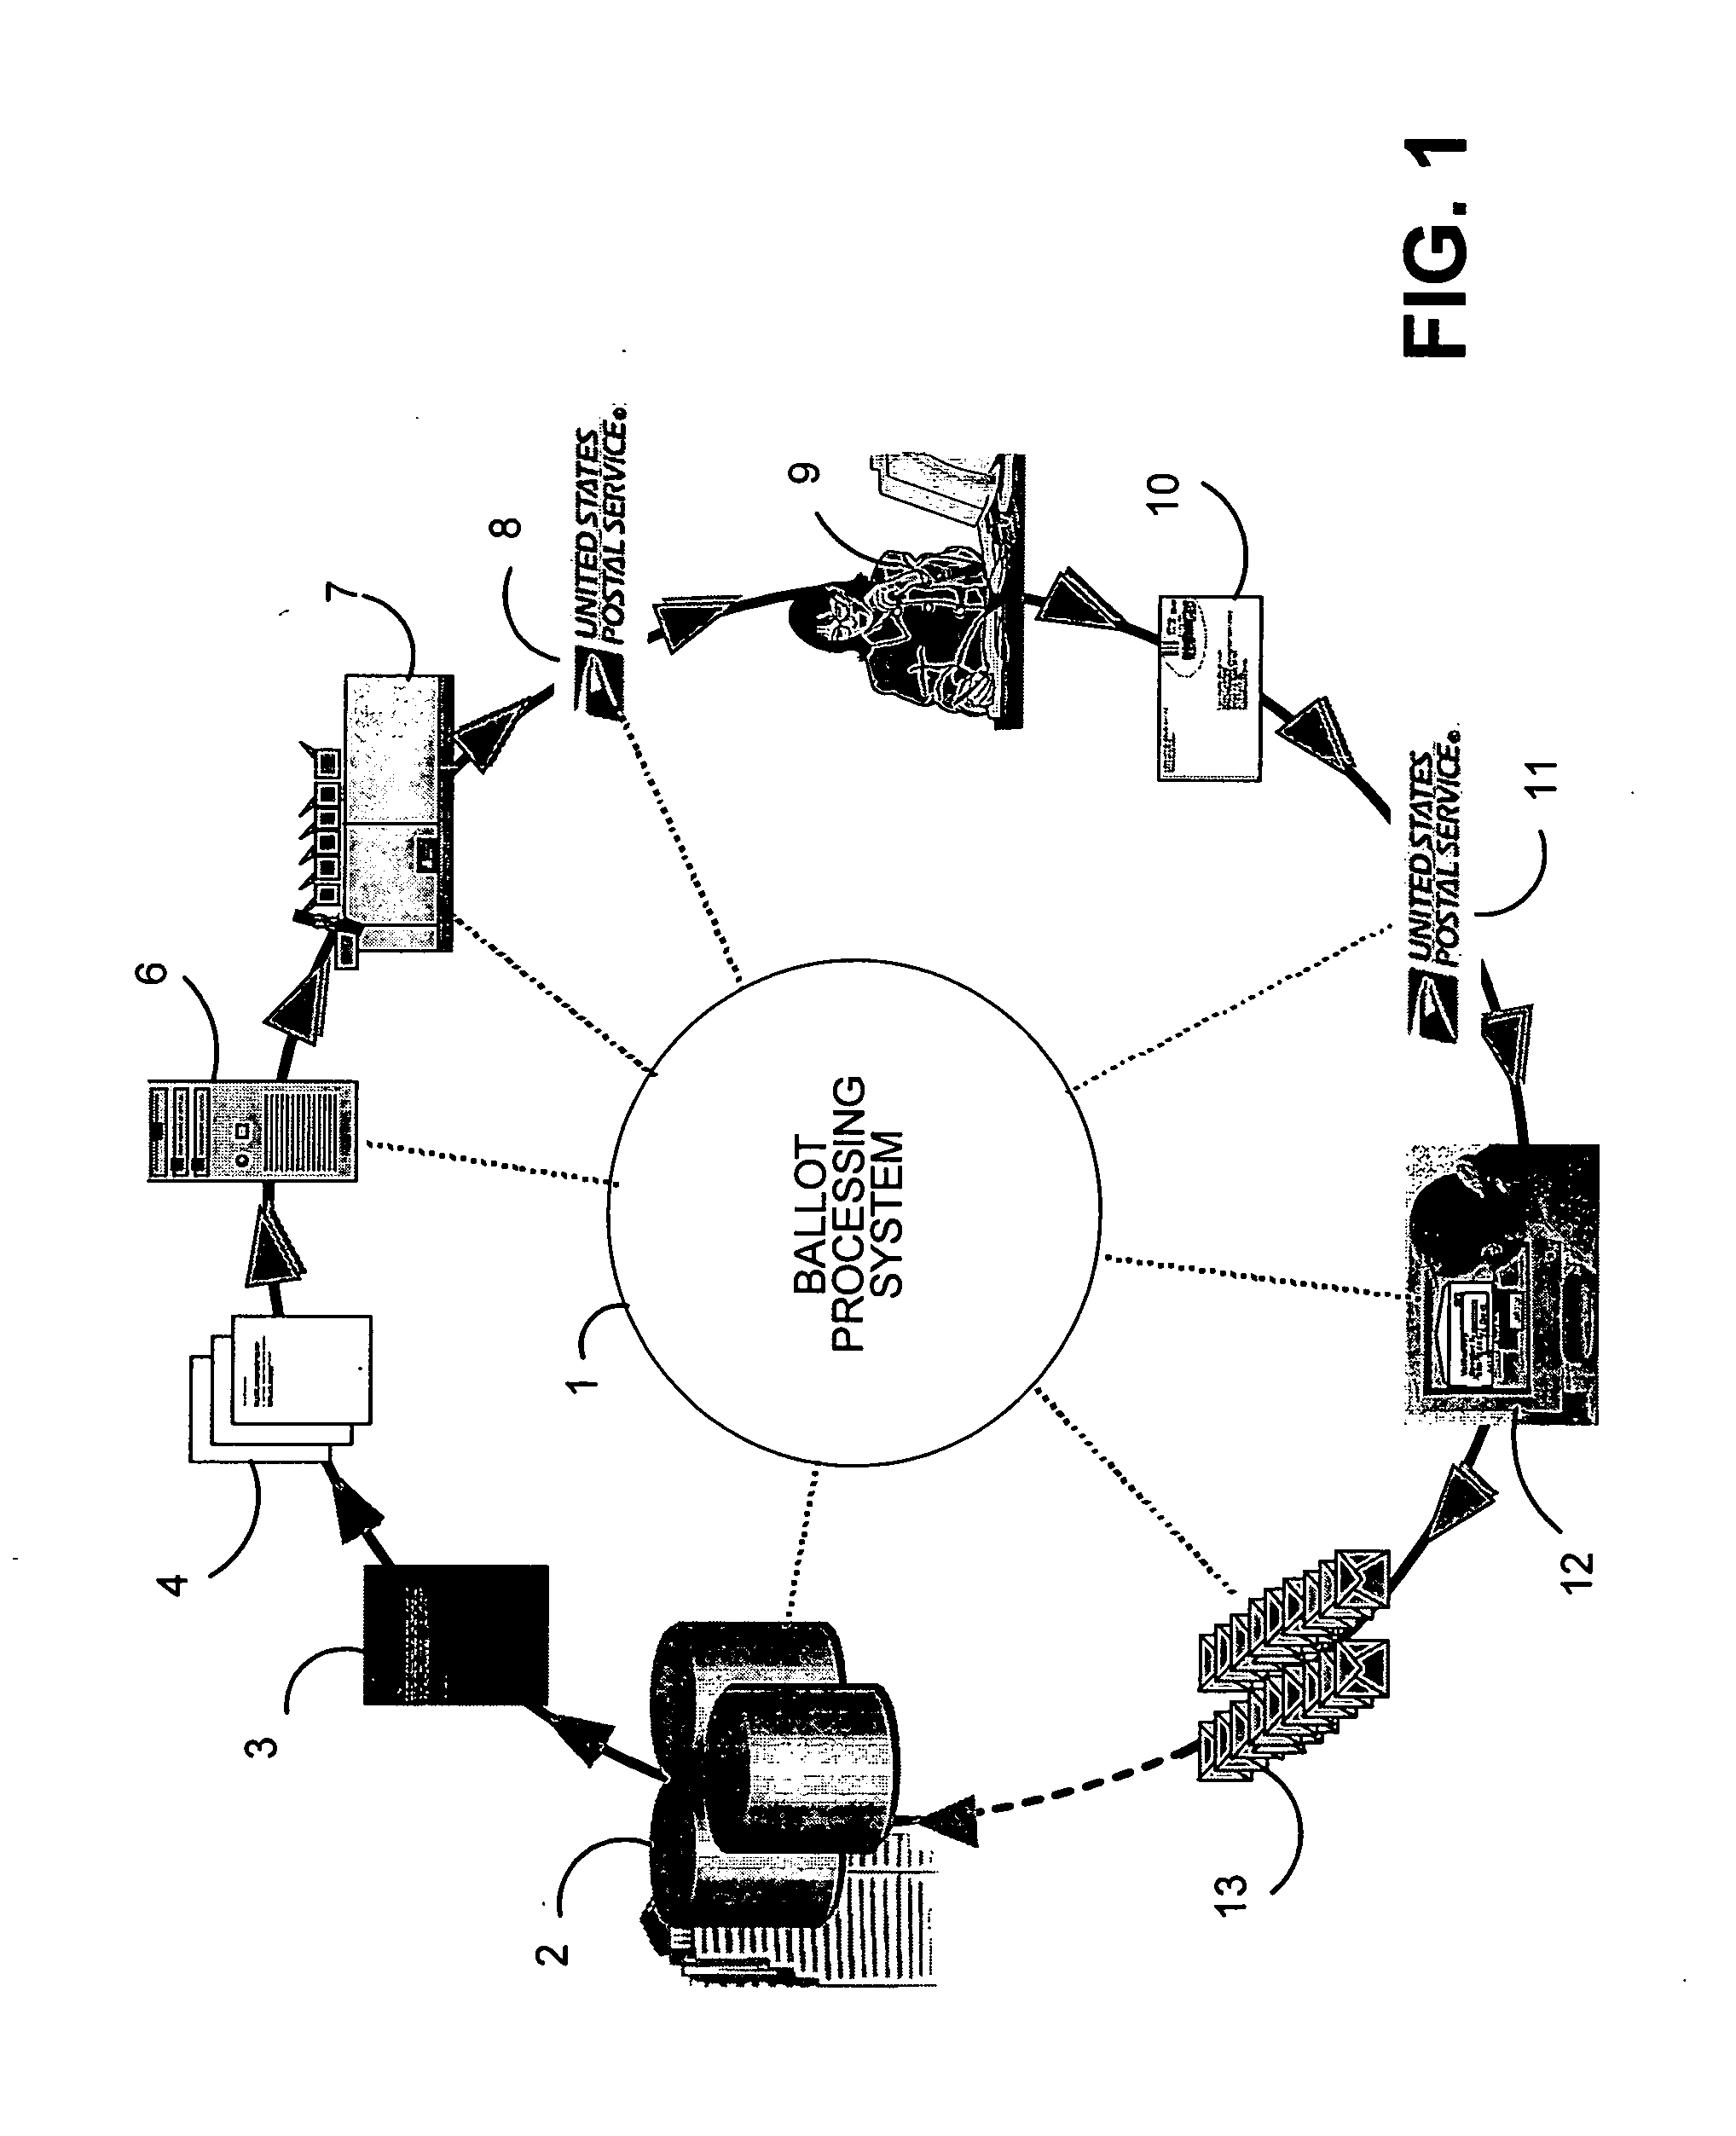 Automated system and method for inbound processing of mailed ballots